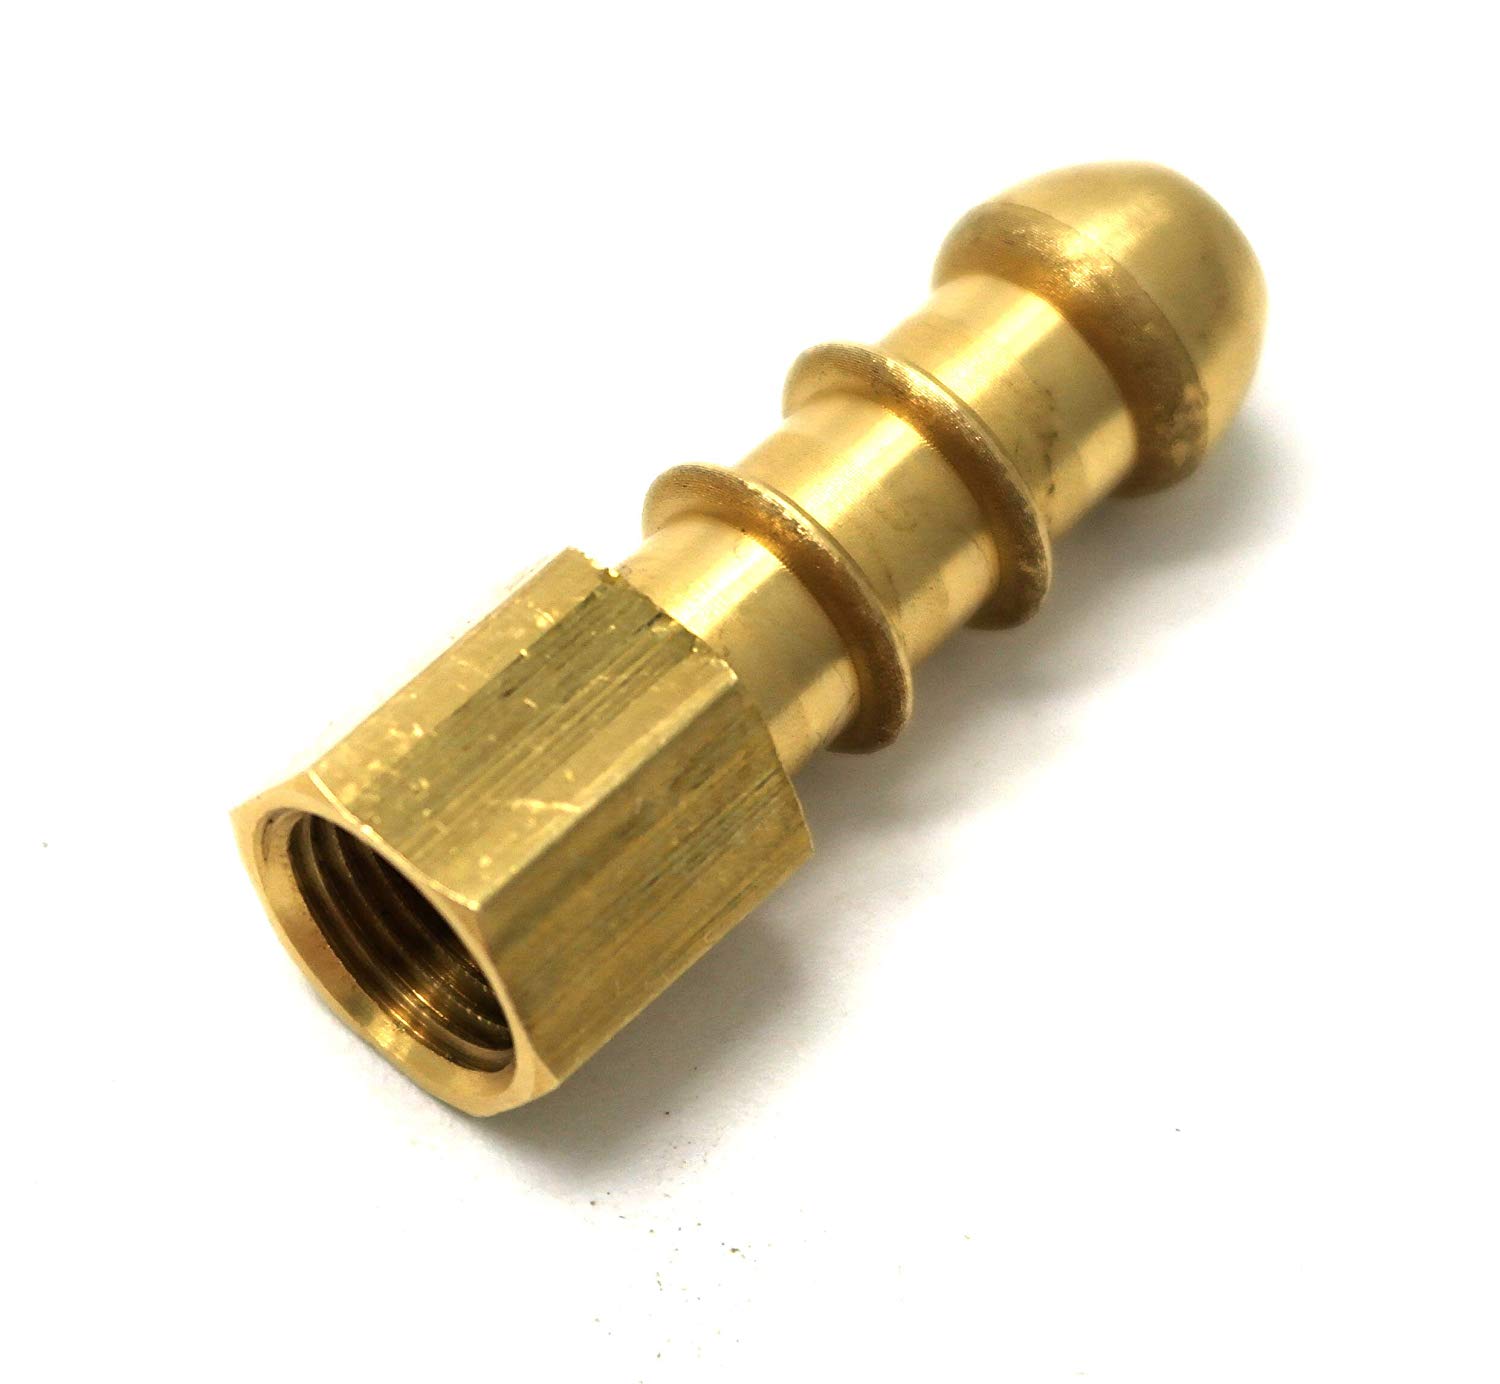 1/8 BSP TM x 10mm male Fulham nozzle to 8mm ID Gas hose. 